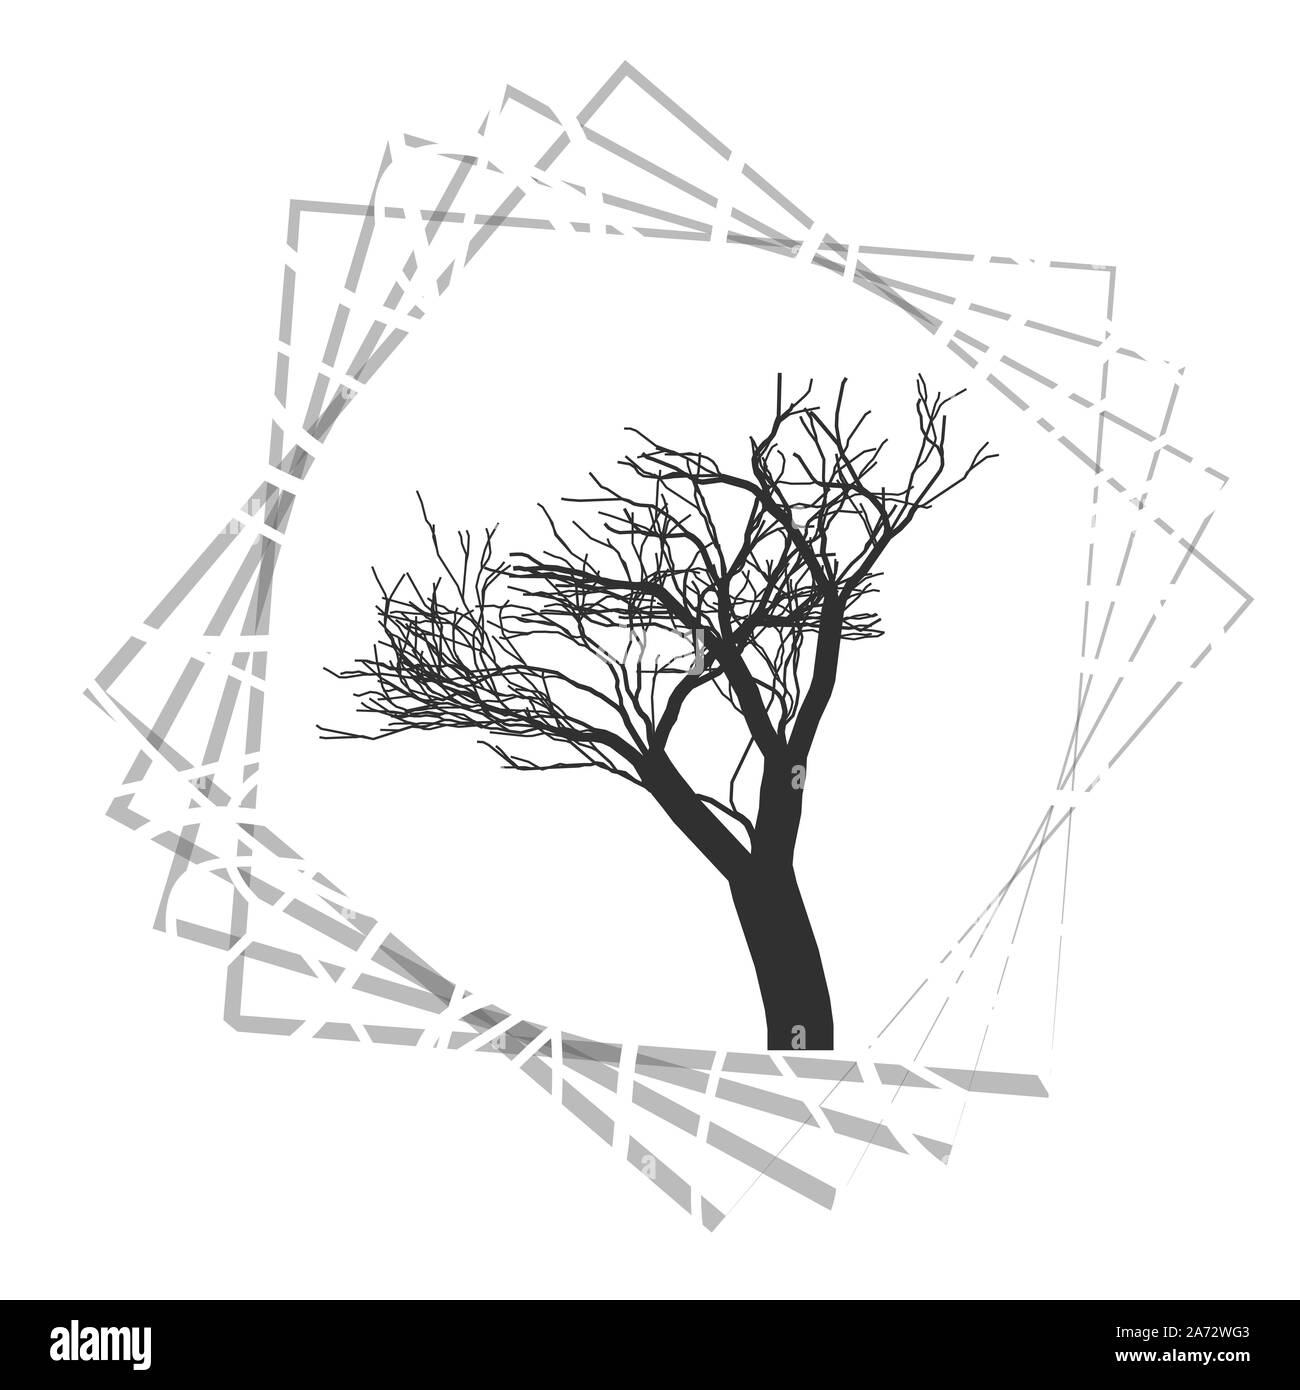 Nature concept represented by dry tree icon. isolated and flat illustration vector eps10 dead trees silhouette Vector Image & Art - Alamy